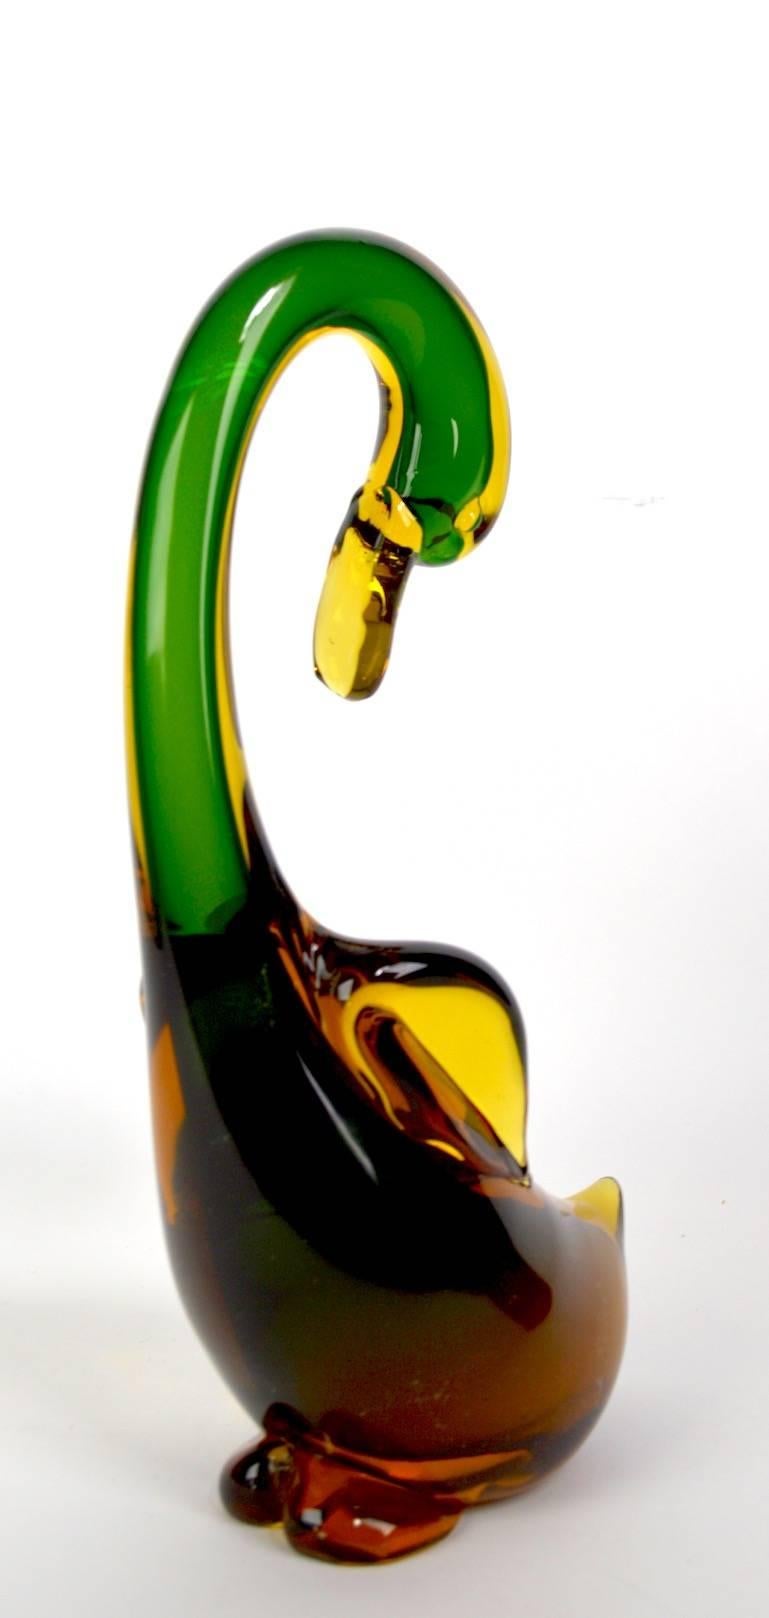 Large and dramatic Italian Murano Art Glass Duck, done in the Sommerso technique. This example is in perfect condition, no chips, cracks, scratches or damage, retains remains of small foil label.